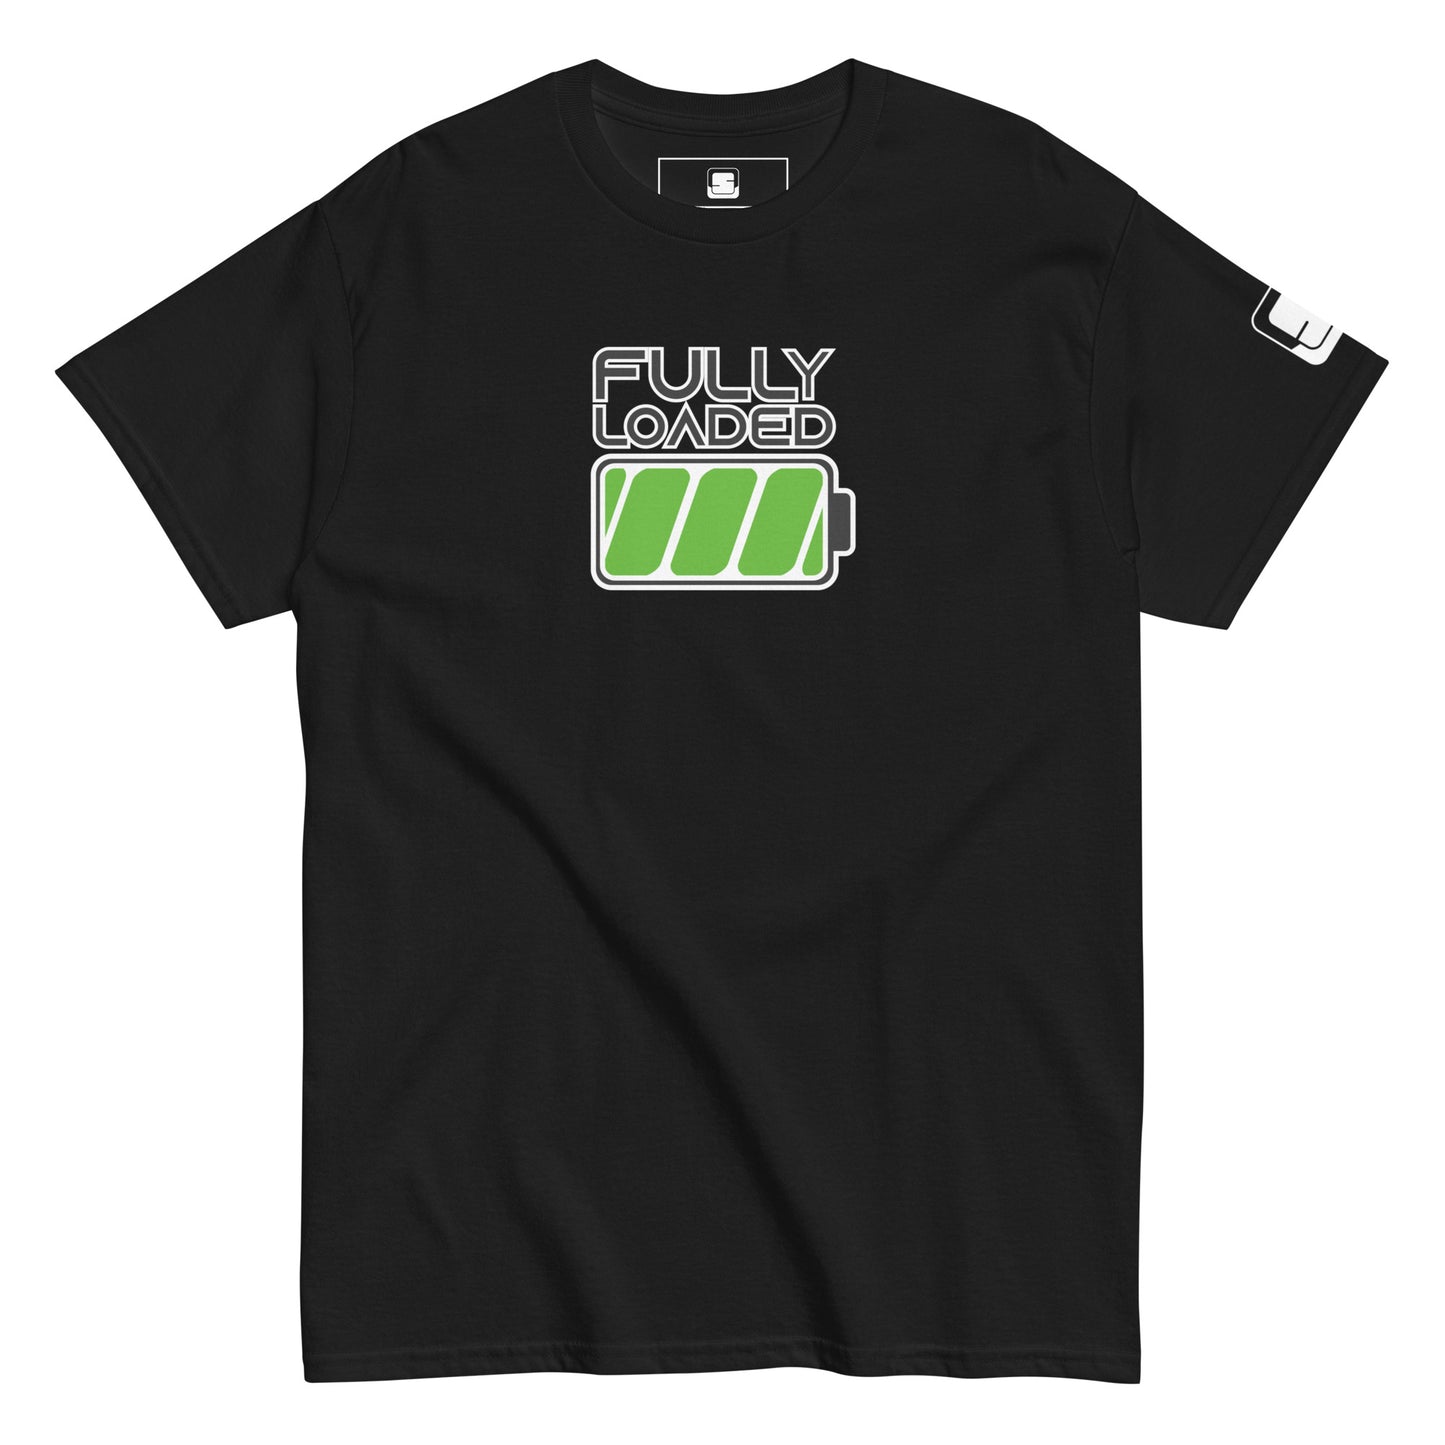 Power Up: The Fully Loaded Tee